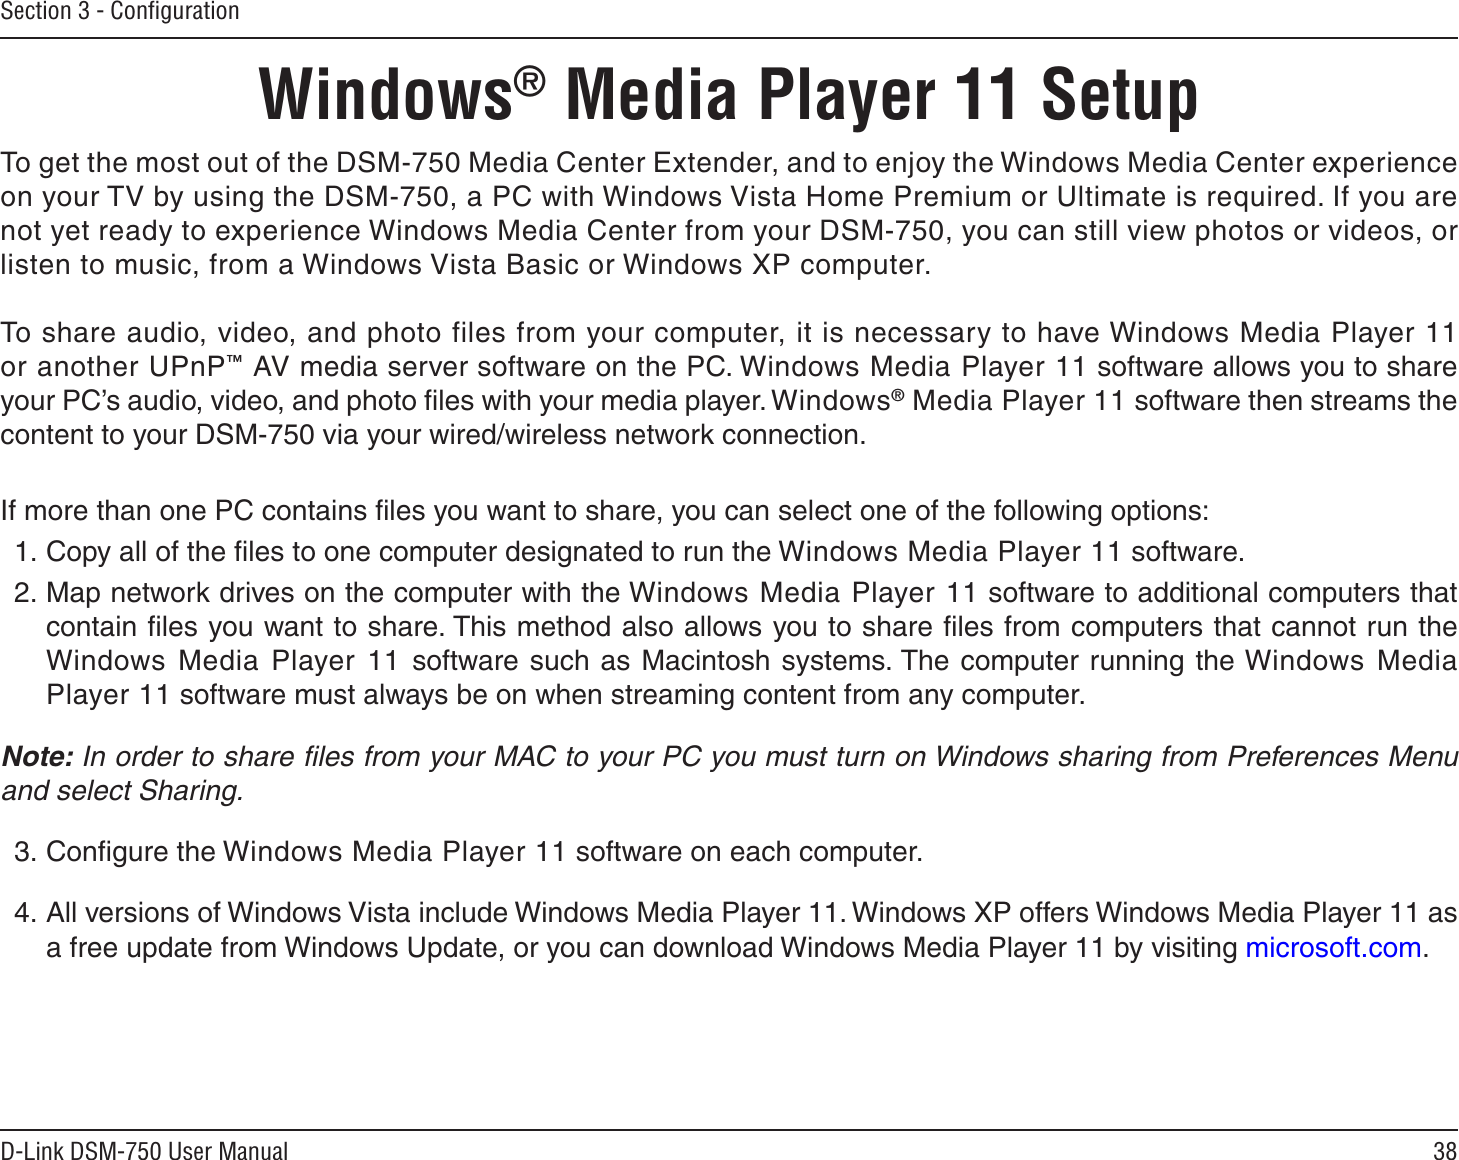 38D-Link DSM-750 User ManualSection 3 - ConﬁgurationTo get the most out of the DSM-750 Media Center Extender, and to enjoy the Windows Media Center experience on your TV by using the DSM-750, a PC with Windows Vista Home Premium or Ultimate is required. If you are not yet ready to experience Windows Media Center from your DSM-750, you can still view photos or videos, or listen to music, from a Windows Vista Basic or Windows XP computer. To share audio, video, and photo files from your computer, it is necessary to have Windows Media Player 11 or another UPnP™ AV media server software on the PC. Windows Media Player 11 software allows you to share your PC’s audio, video, and photo ﬁles with your media player. Windows® Media Player 11 software then streams the content to your DSM-750 via your wired/wireless network connection. If more than one PC contains ﬁles you want to share, you can select one of the following options:1. Copy all of the ﬁles to one computer designated to run the Windows Media Player 11 software.2. Map network drives on the computer with the Windows Media Player 11 software to additional computers that contain ﬁles you want to share. This method also allows you to share ﬁles from computers that cannot run the Windows Media Player 11 software such as Macintosh systems. The computer running the Windows Media Player 11 software must always be on when streaming content from any computer.  Note: In order to share ﬁles from your MAC to your PC you must turn on Windows sharing from Preferences Menu and select Sharing.3. Conﬁgure the Windows Media Player 11 software on each computer. 4. All versions of Windows Vista include Windows Media Player 11. Windows XP offers Windows Media Player 11 as a free update from Windows Update, or you can download Windows Media Player 11 by visiting microsoft.com.Windows® Media Player 11 Setup